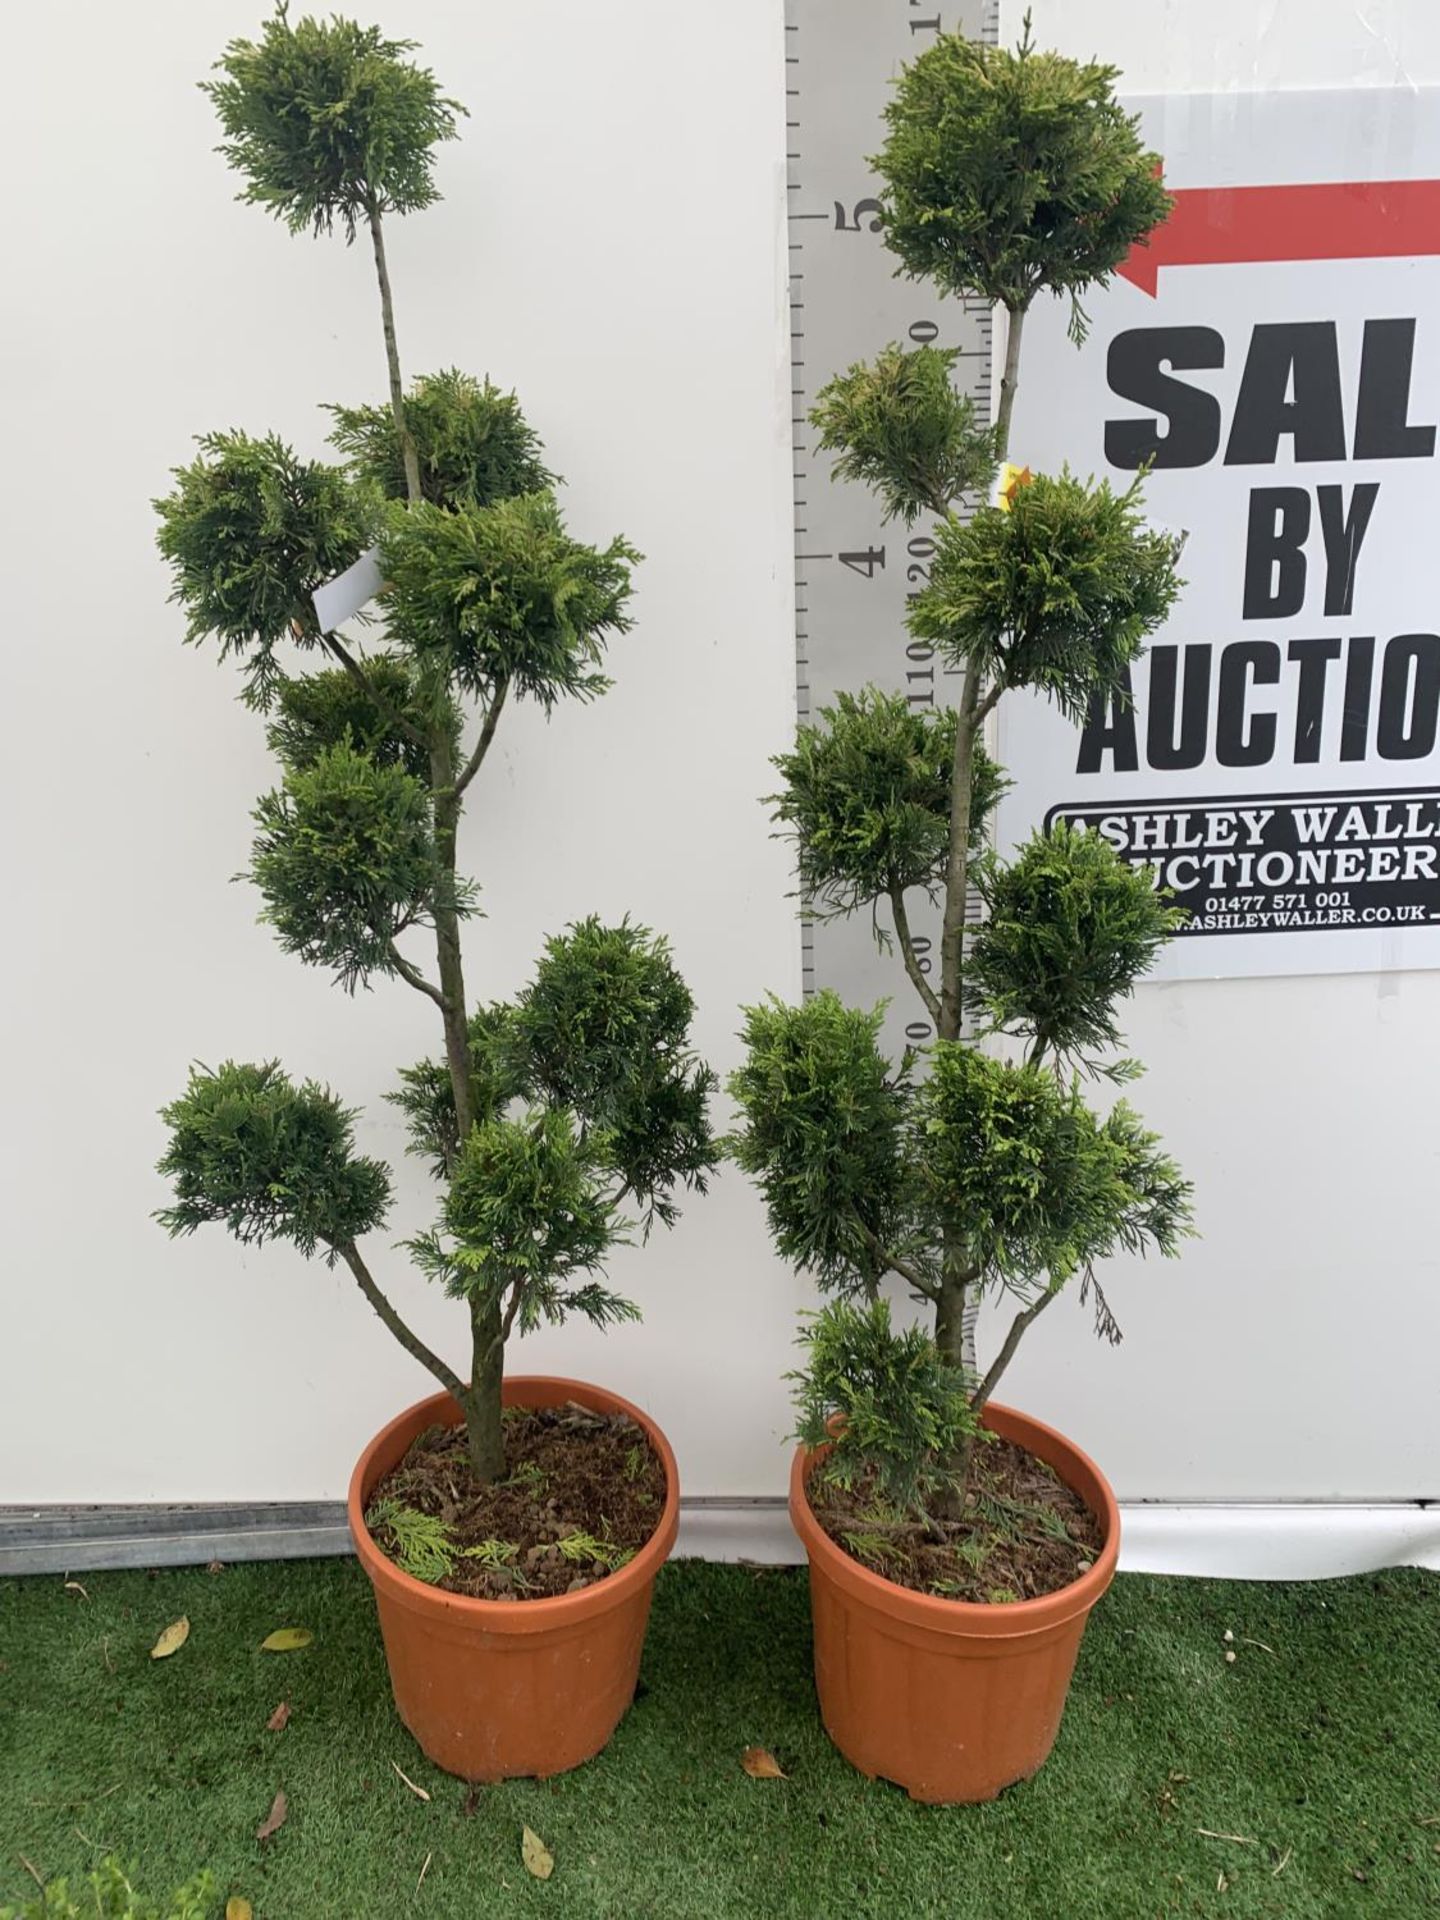 TWO POM POM TREES CUPRESSOCYPARIS LEYLANDII 'GOLD RIDER' APPROX 150CM IN HEIGHT IN 15 LTR POTS - Image 2 of 6